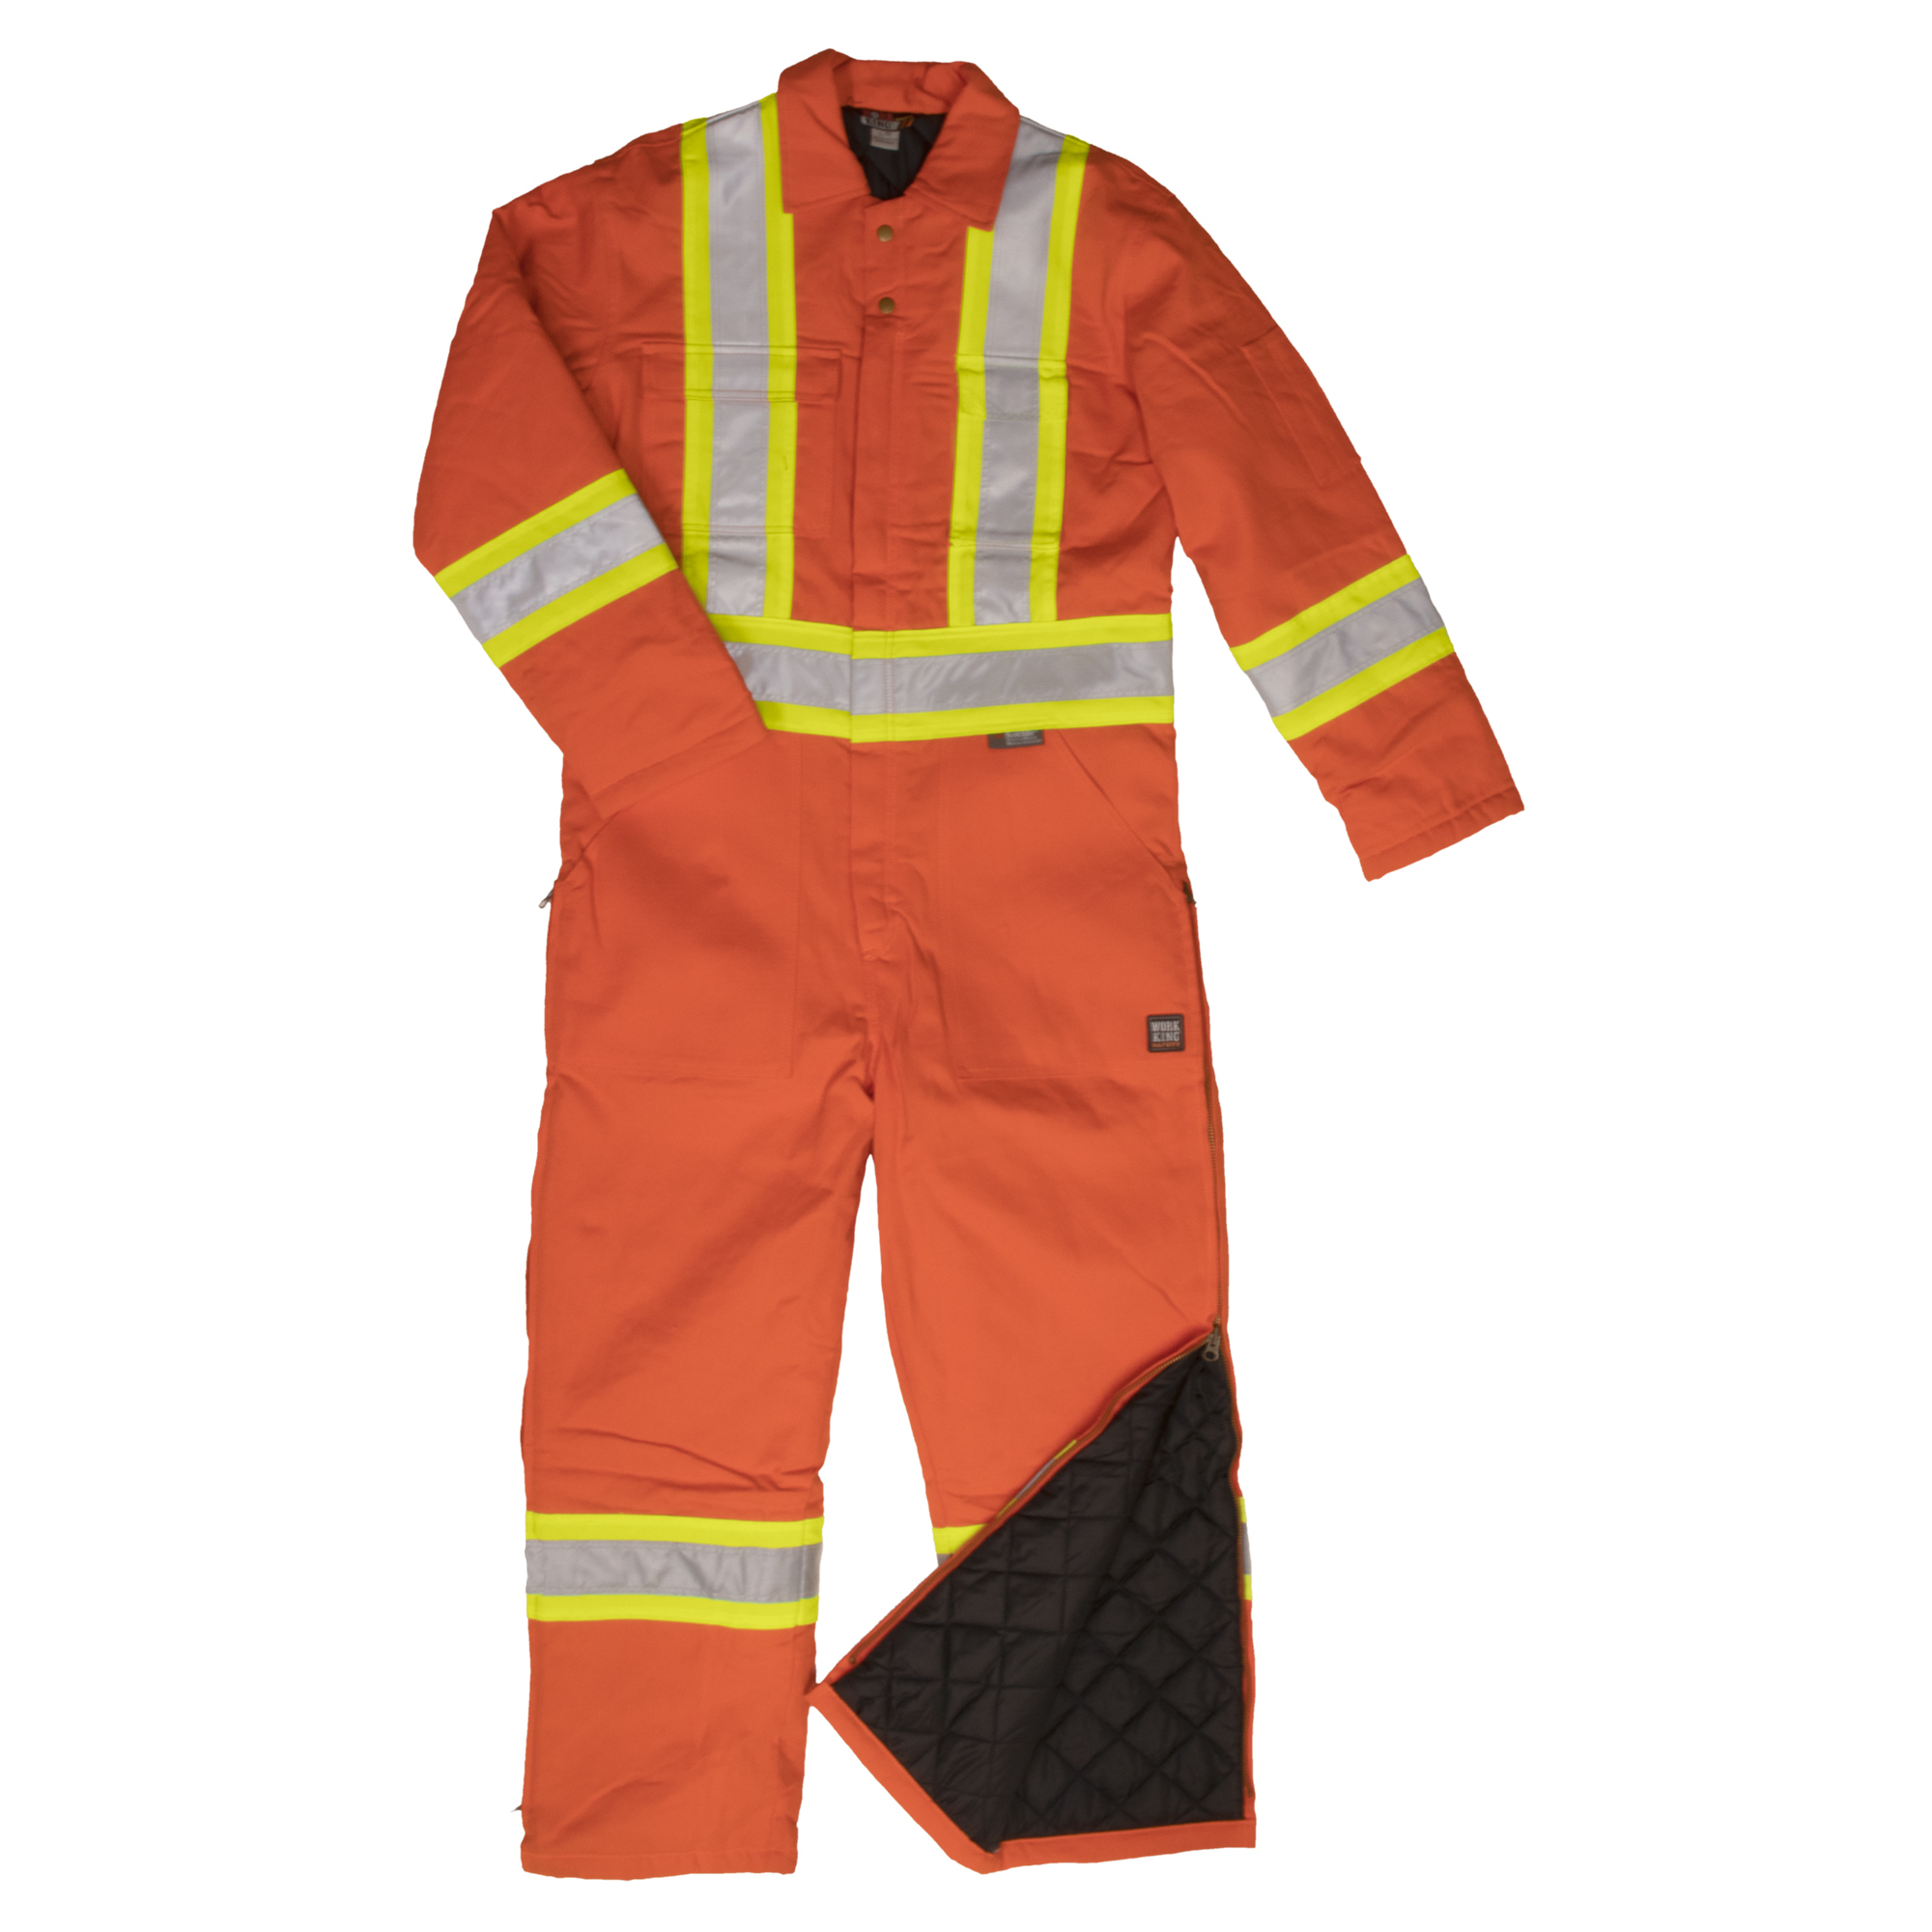 Tough Duck, Insulated Safety Coverall, Size XL, Color Orange, Model S78711